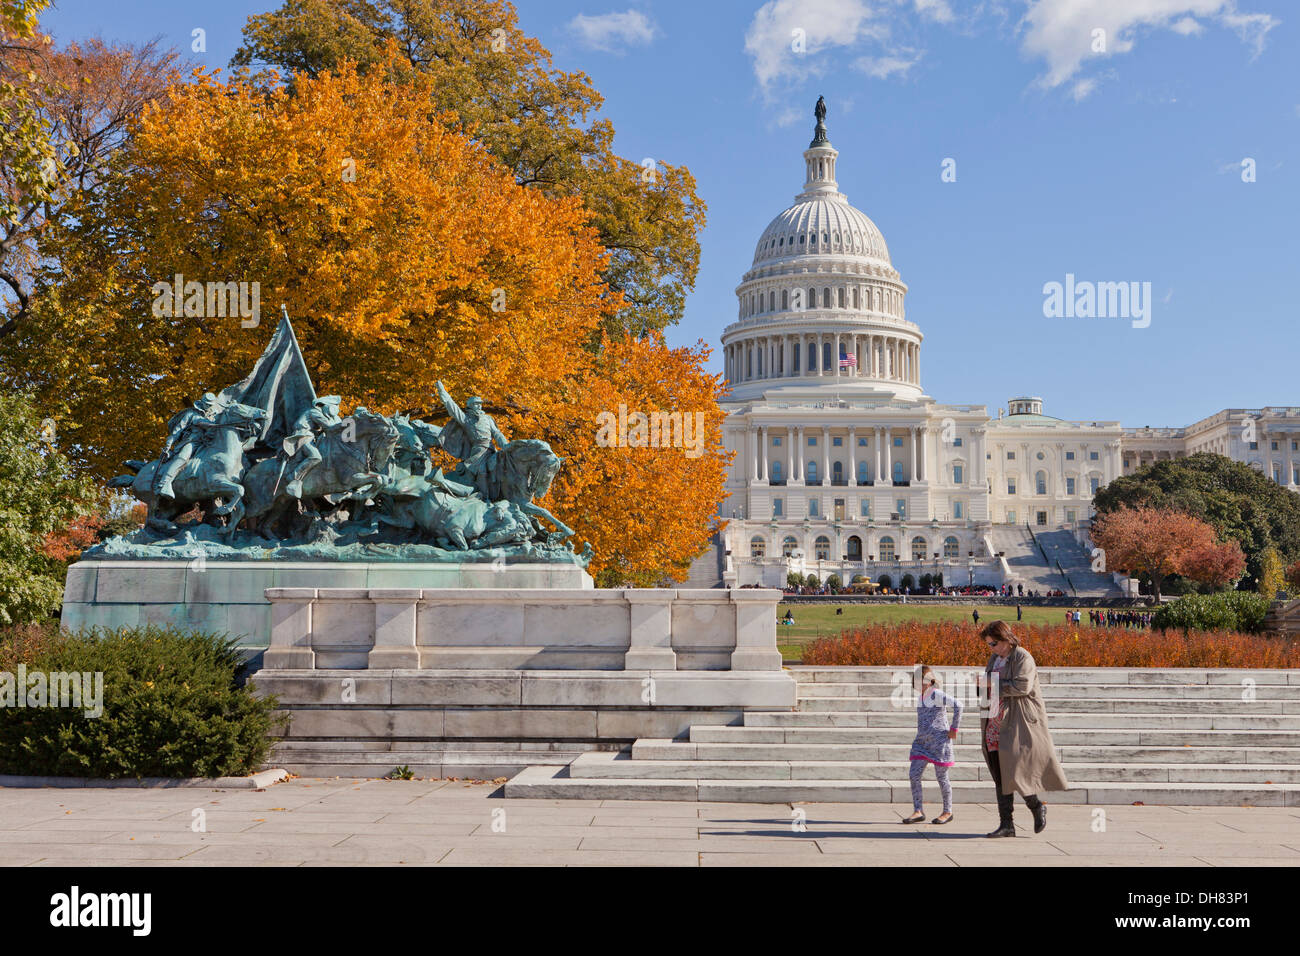 Ulysses S. Grant Memorial on the US Capitol grounds - Washington, DC USA Stock Photo